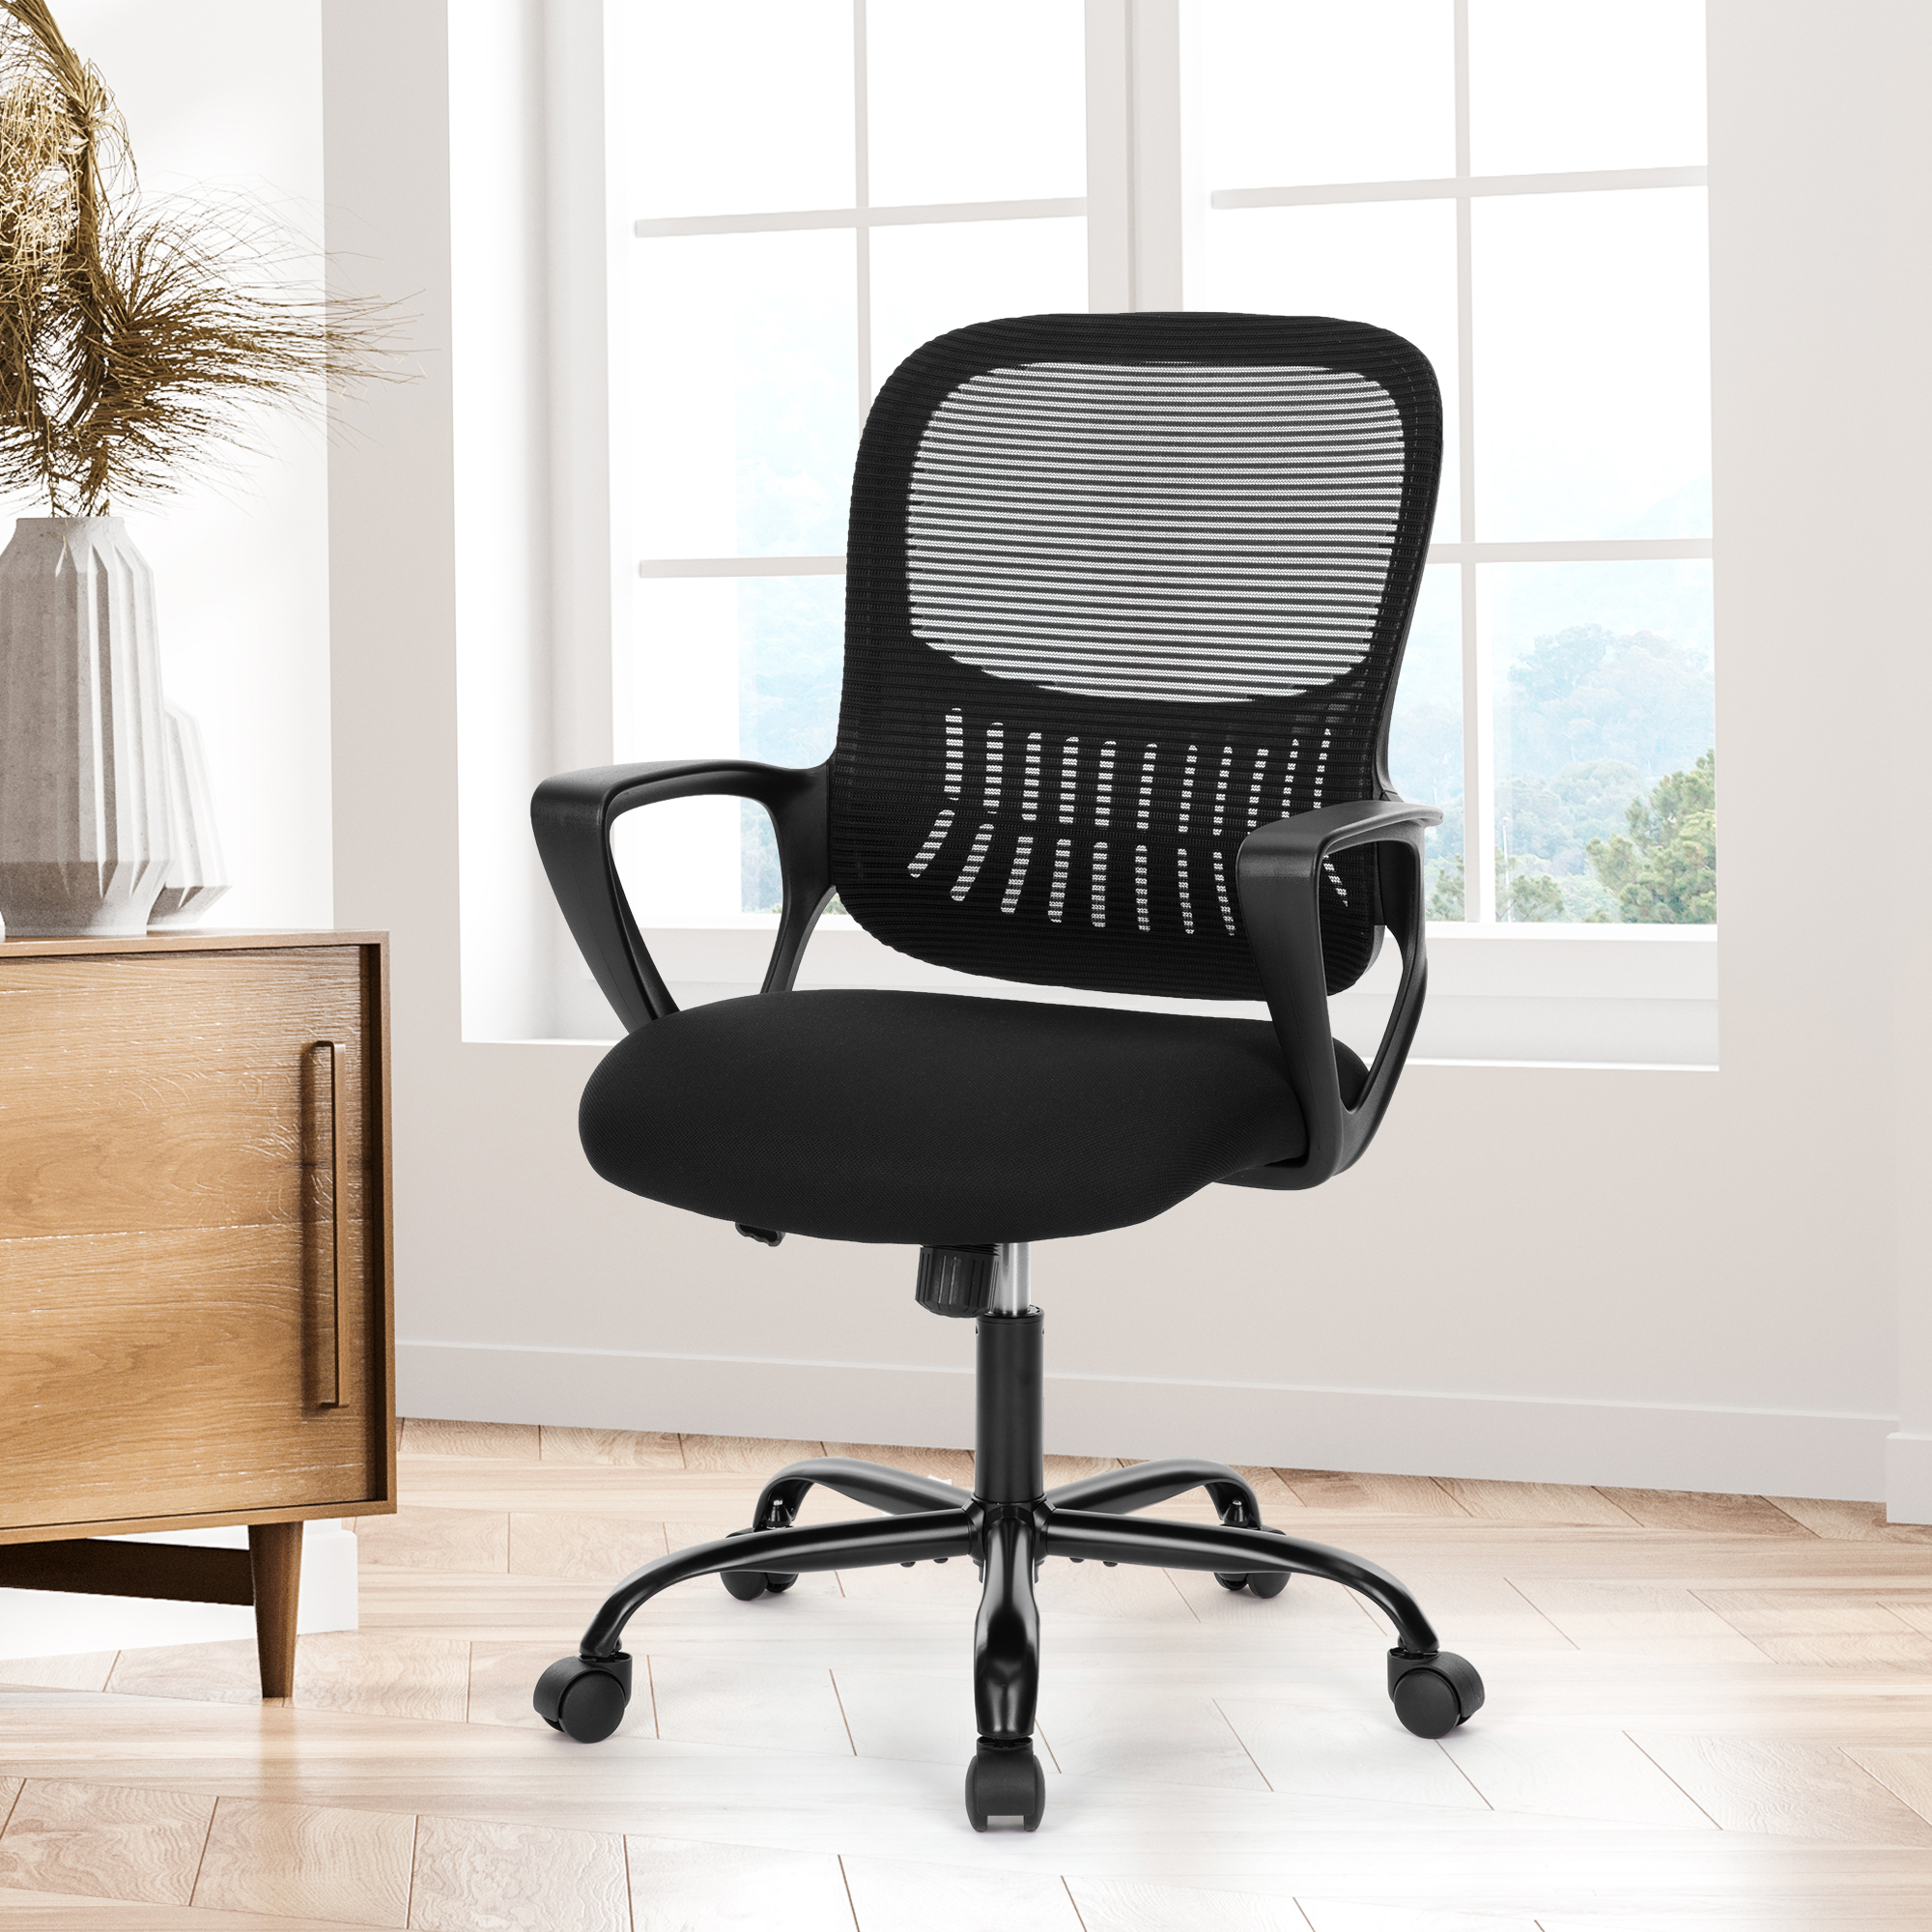 Yangming Mid Back Office Chair, Mesh Ergonomic Swivel Computer Desk Chair with Lumbar Support, Black - image 1 of 9